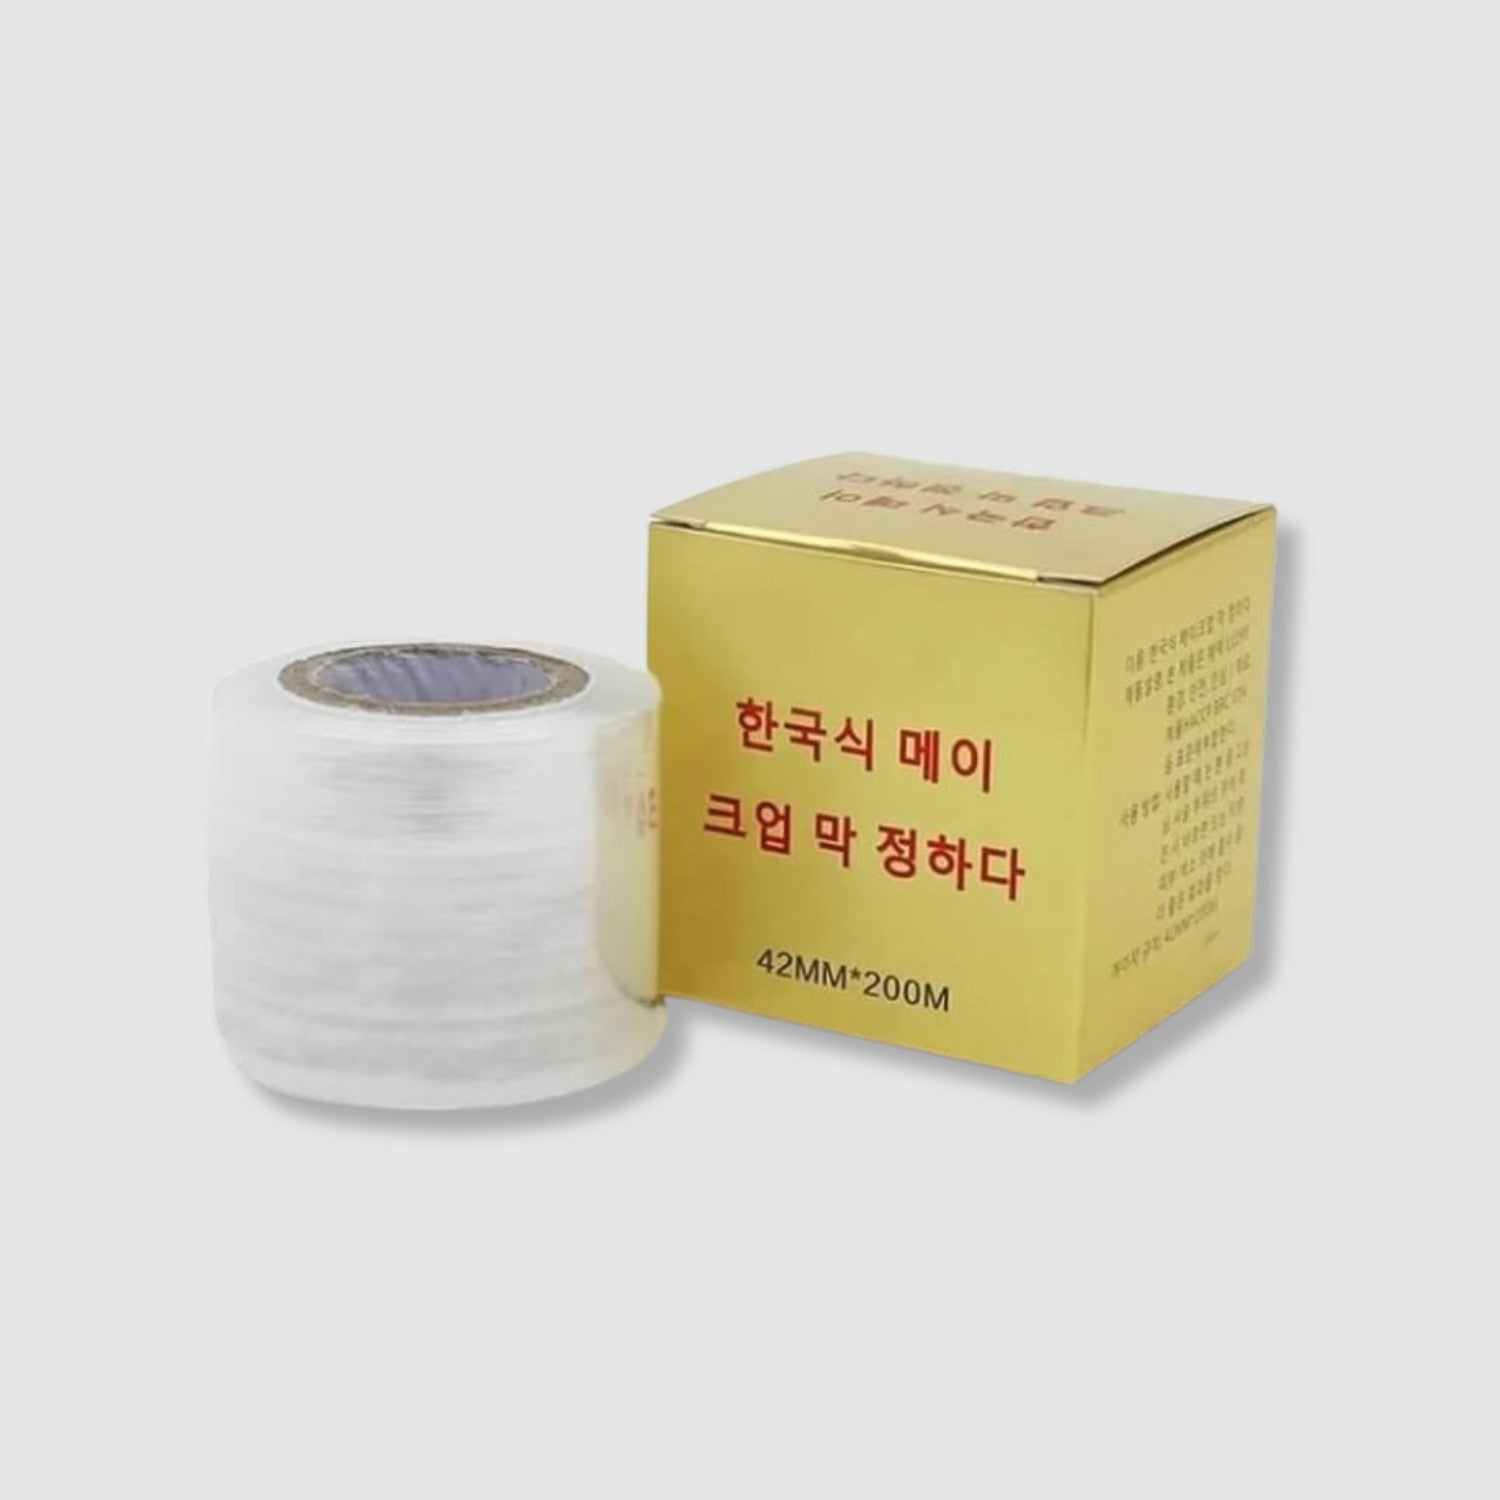 Disposable Plastic Wrap for Permanent Makeup, Disposable Cling Wrap, with packaging